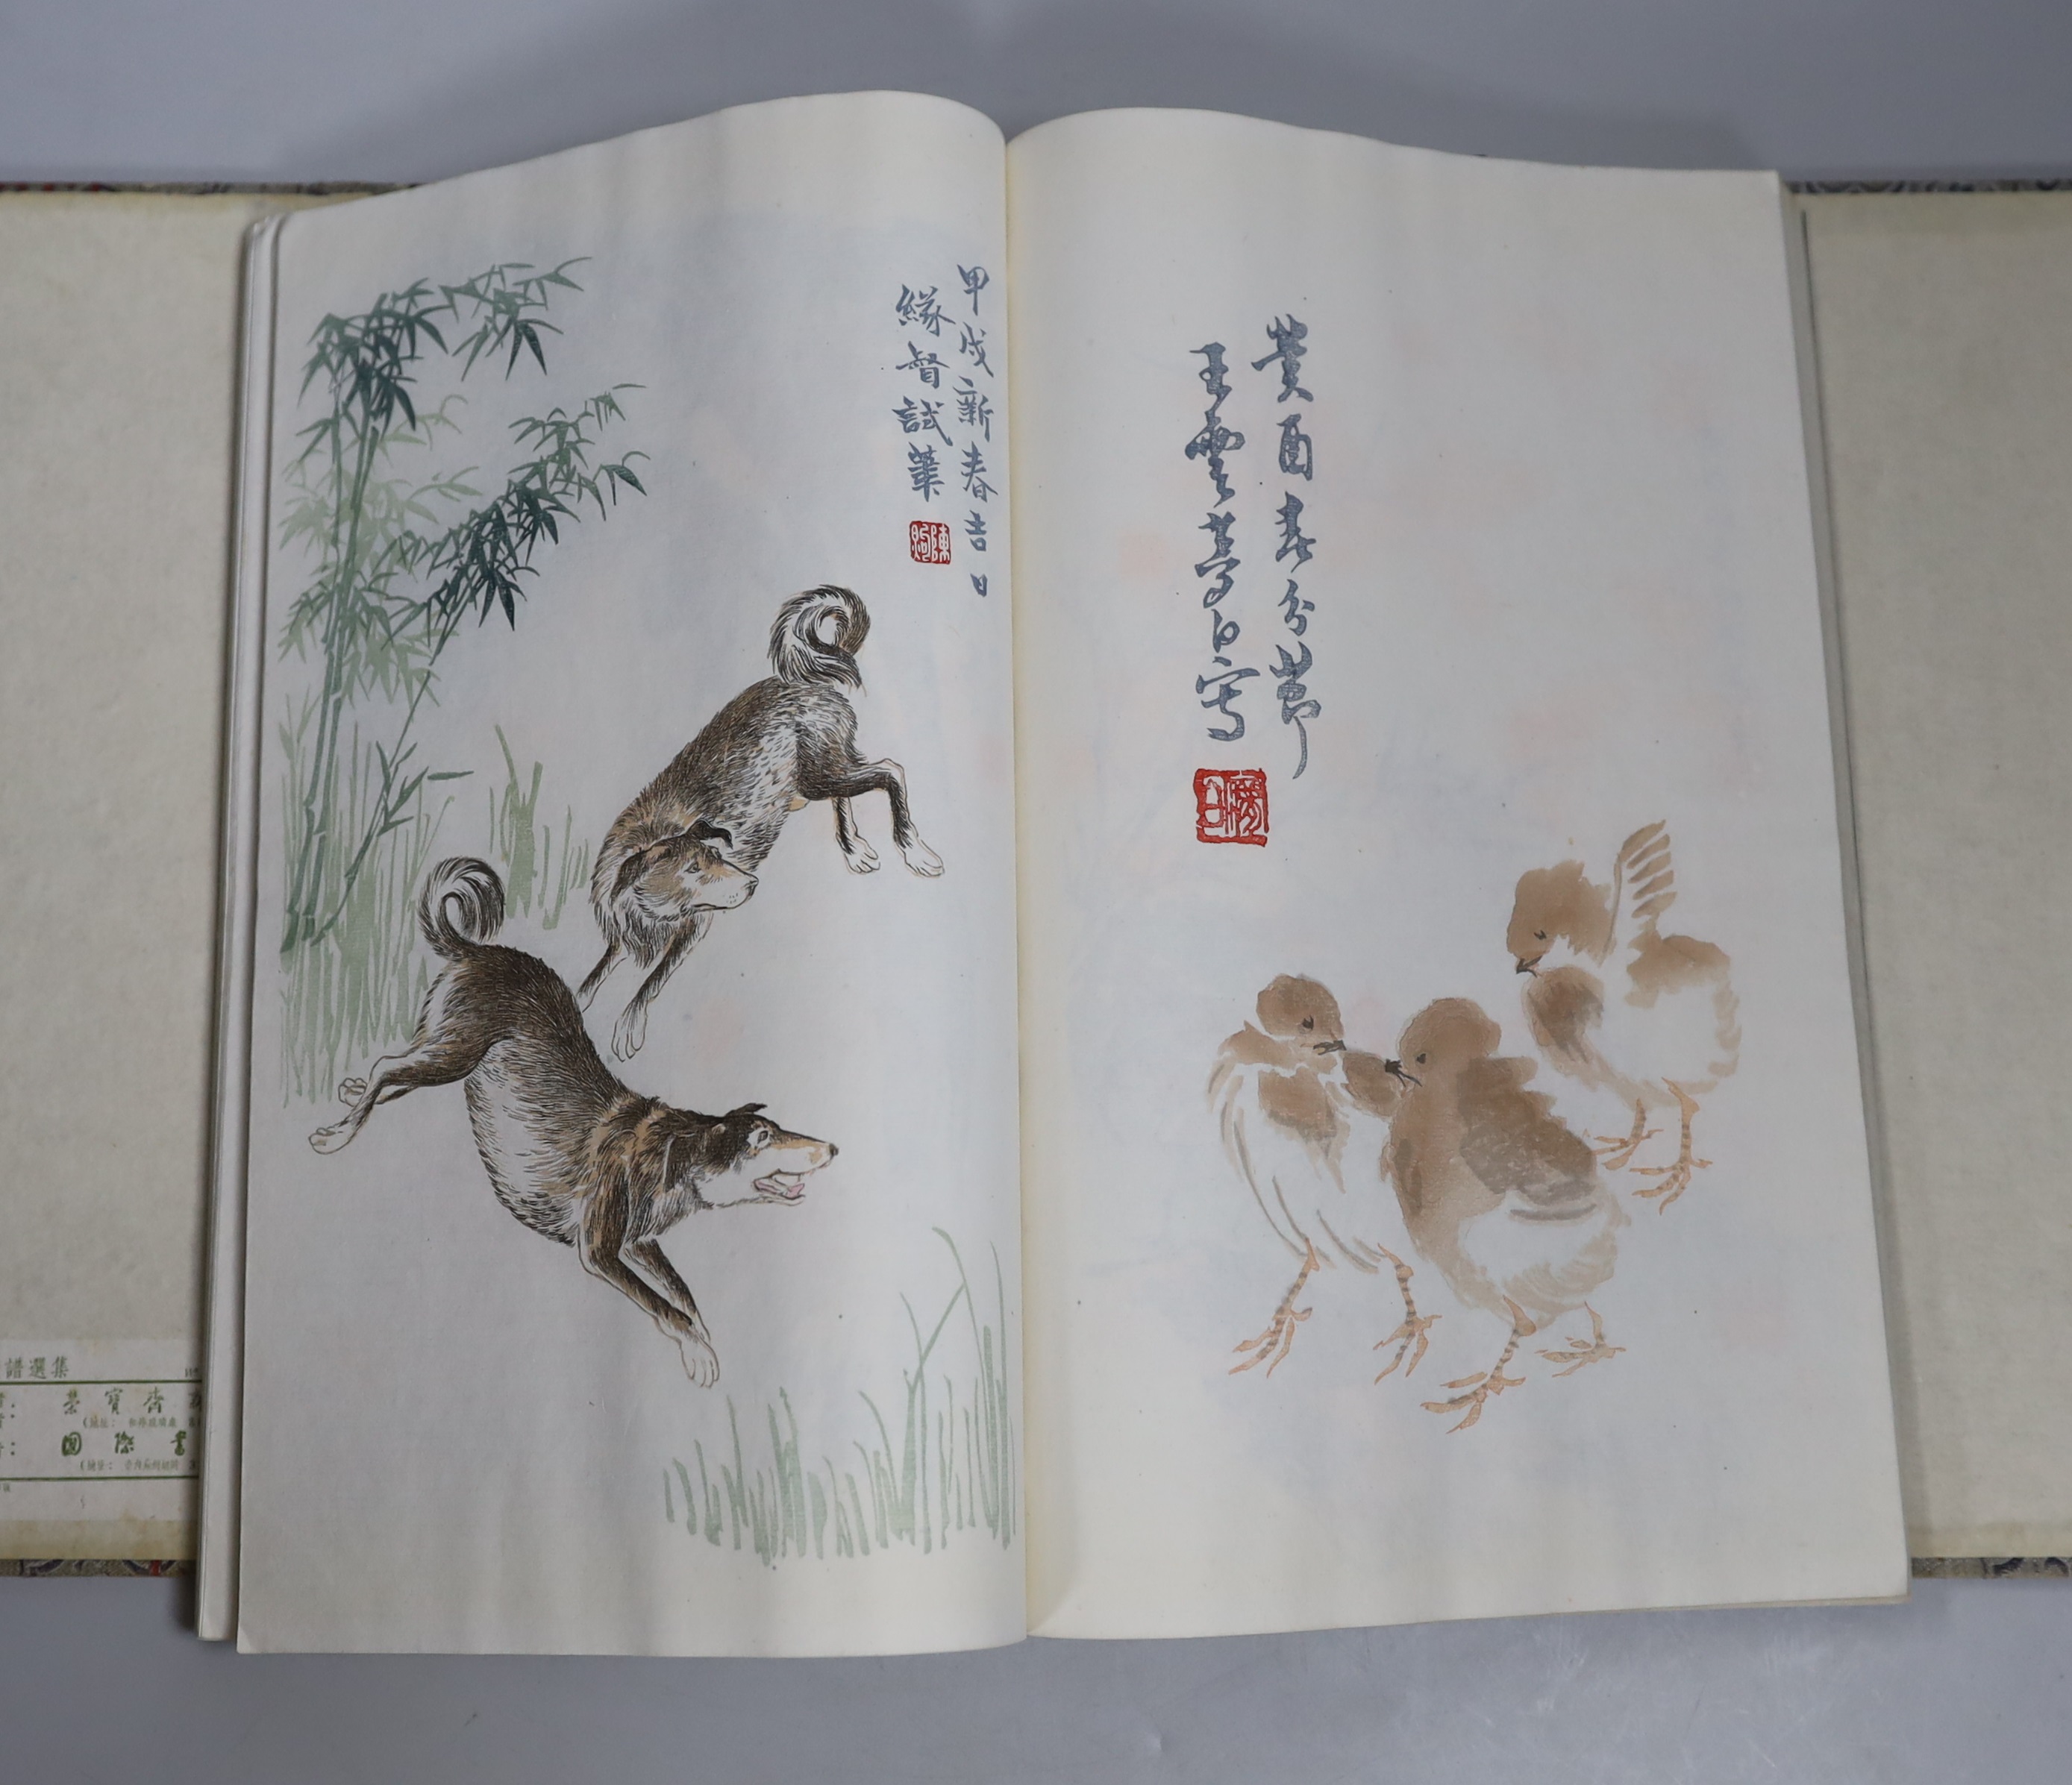 A Chinese book of woodblock prints of works by famous artists including Qi Baishi, published by - Image 6 of 6